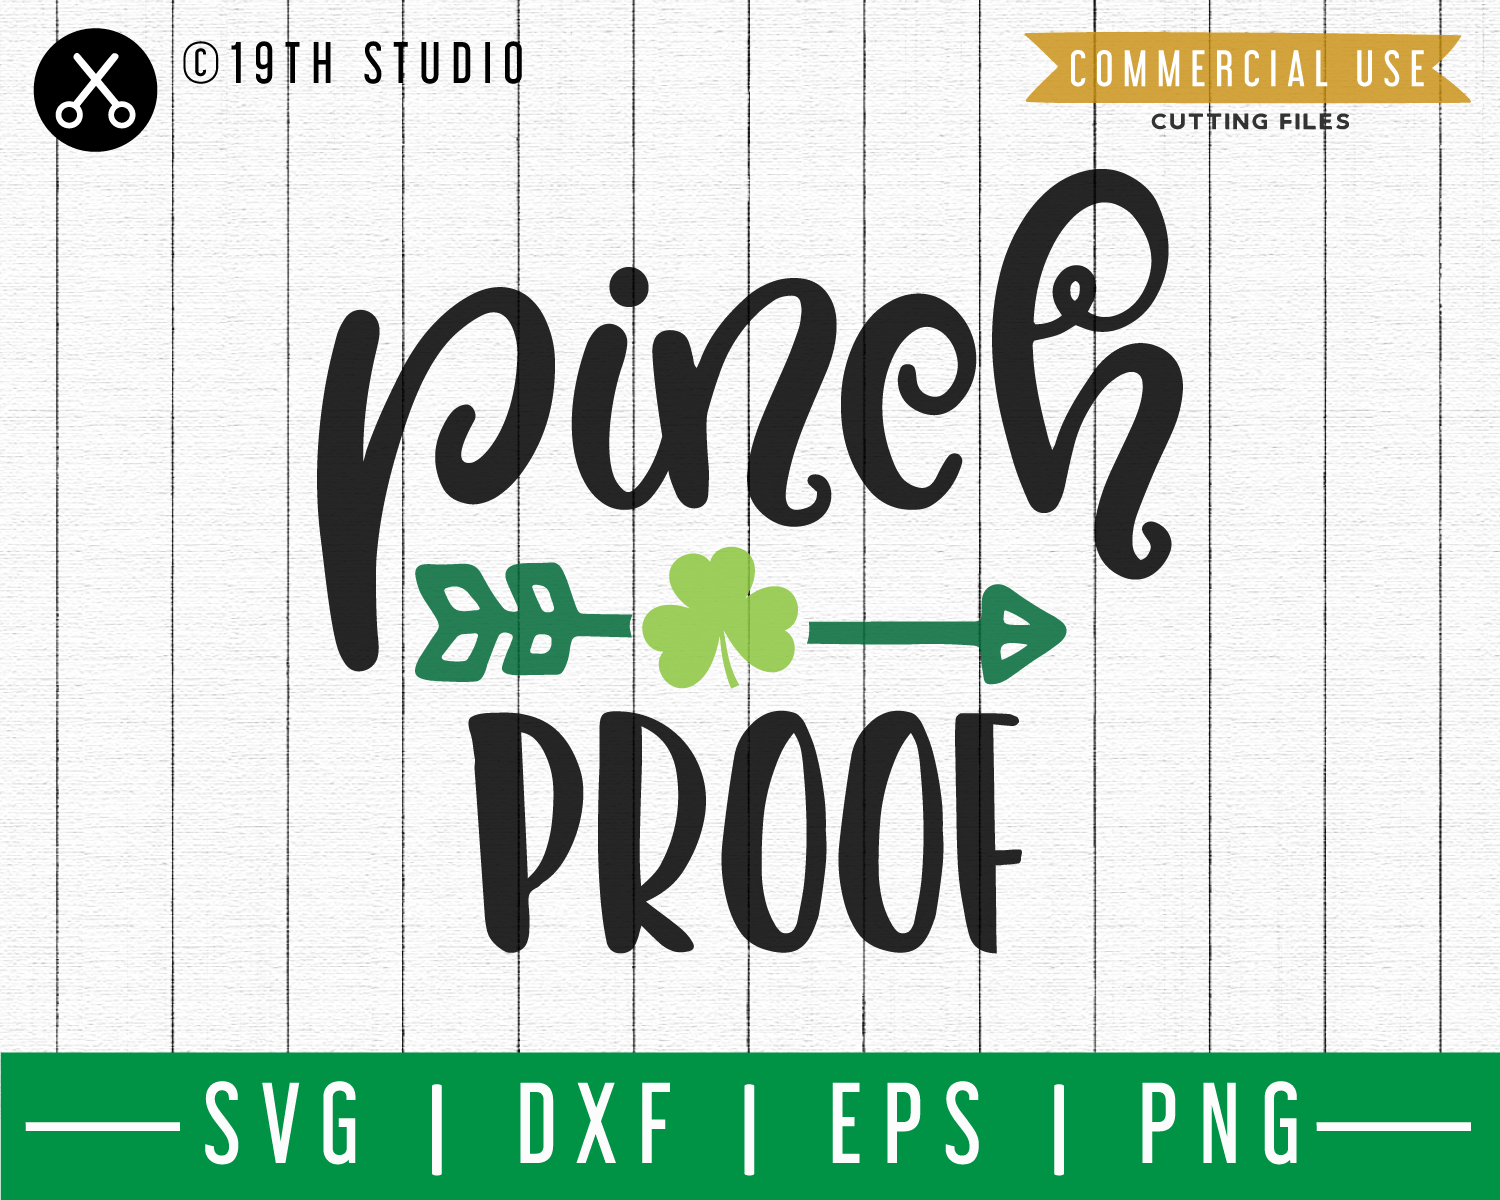 Pinch proof SVG | A St. Patrick's Day SVG cut file M45F Craft House SVG - SVG files for Cricut and Silhouette